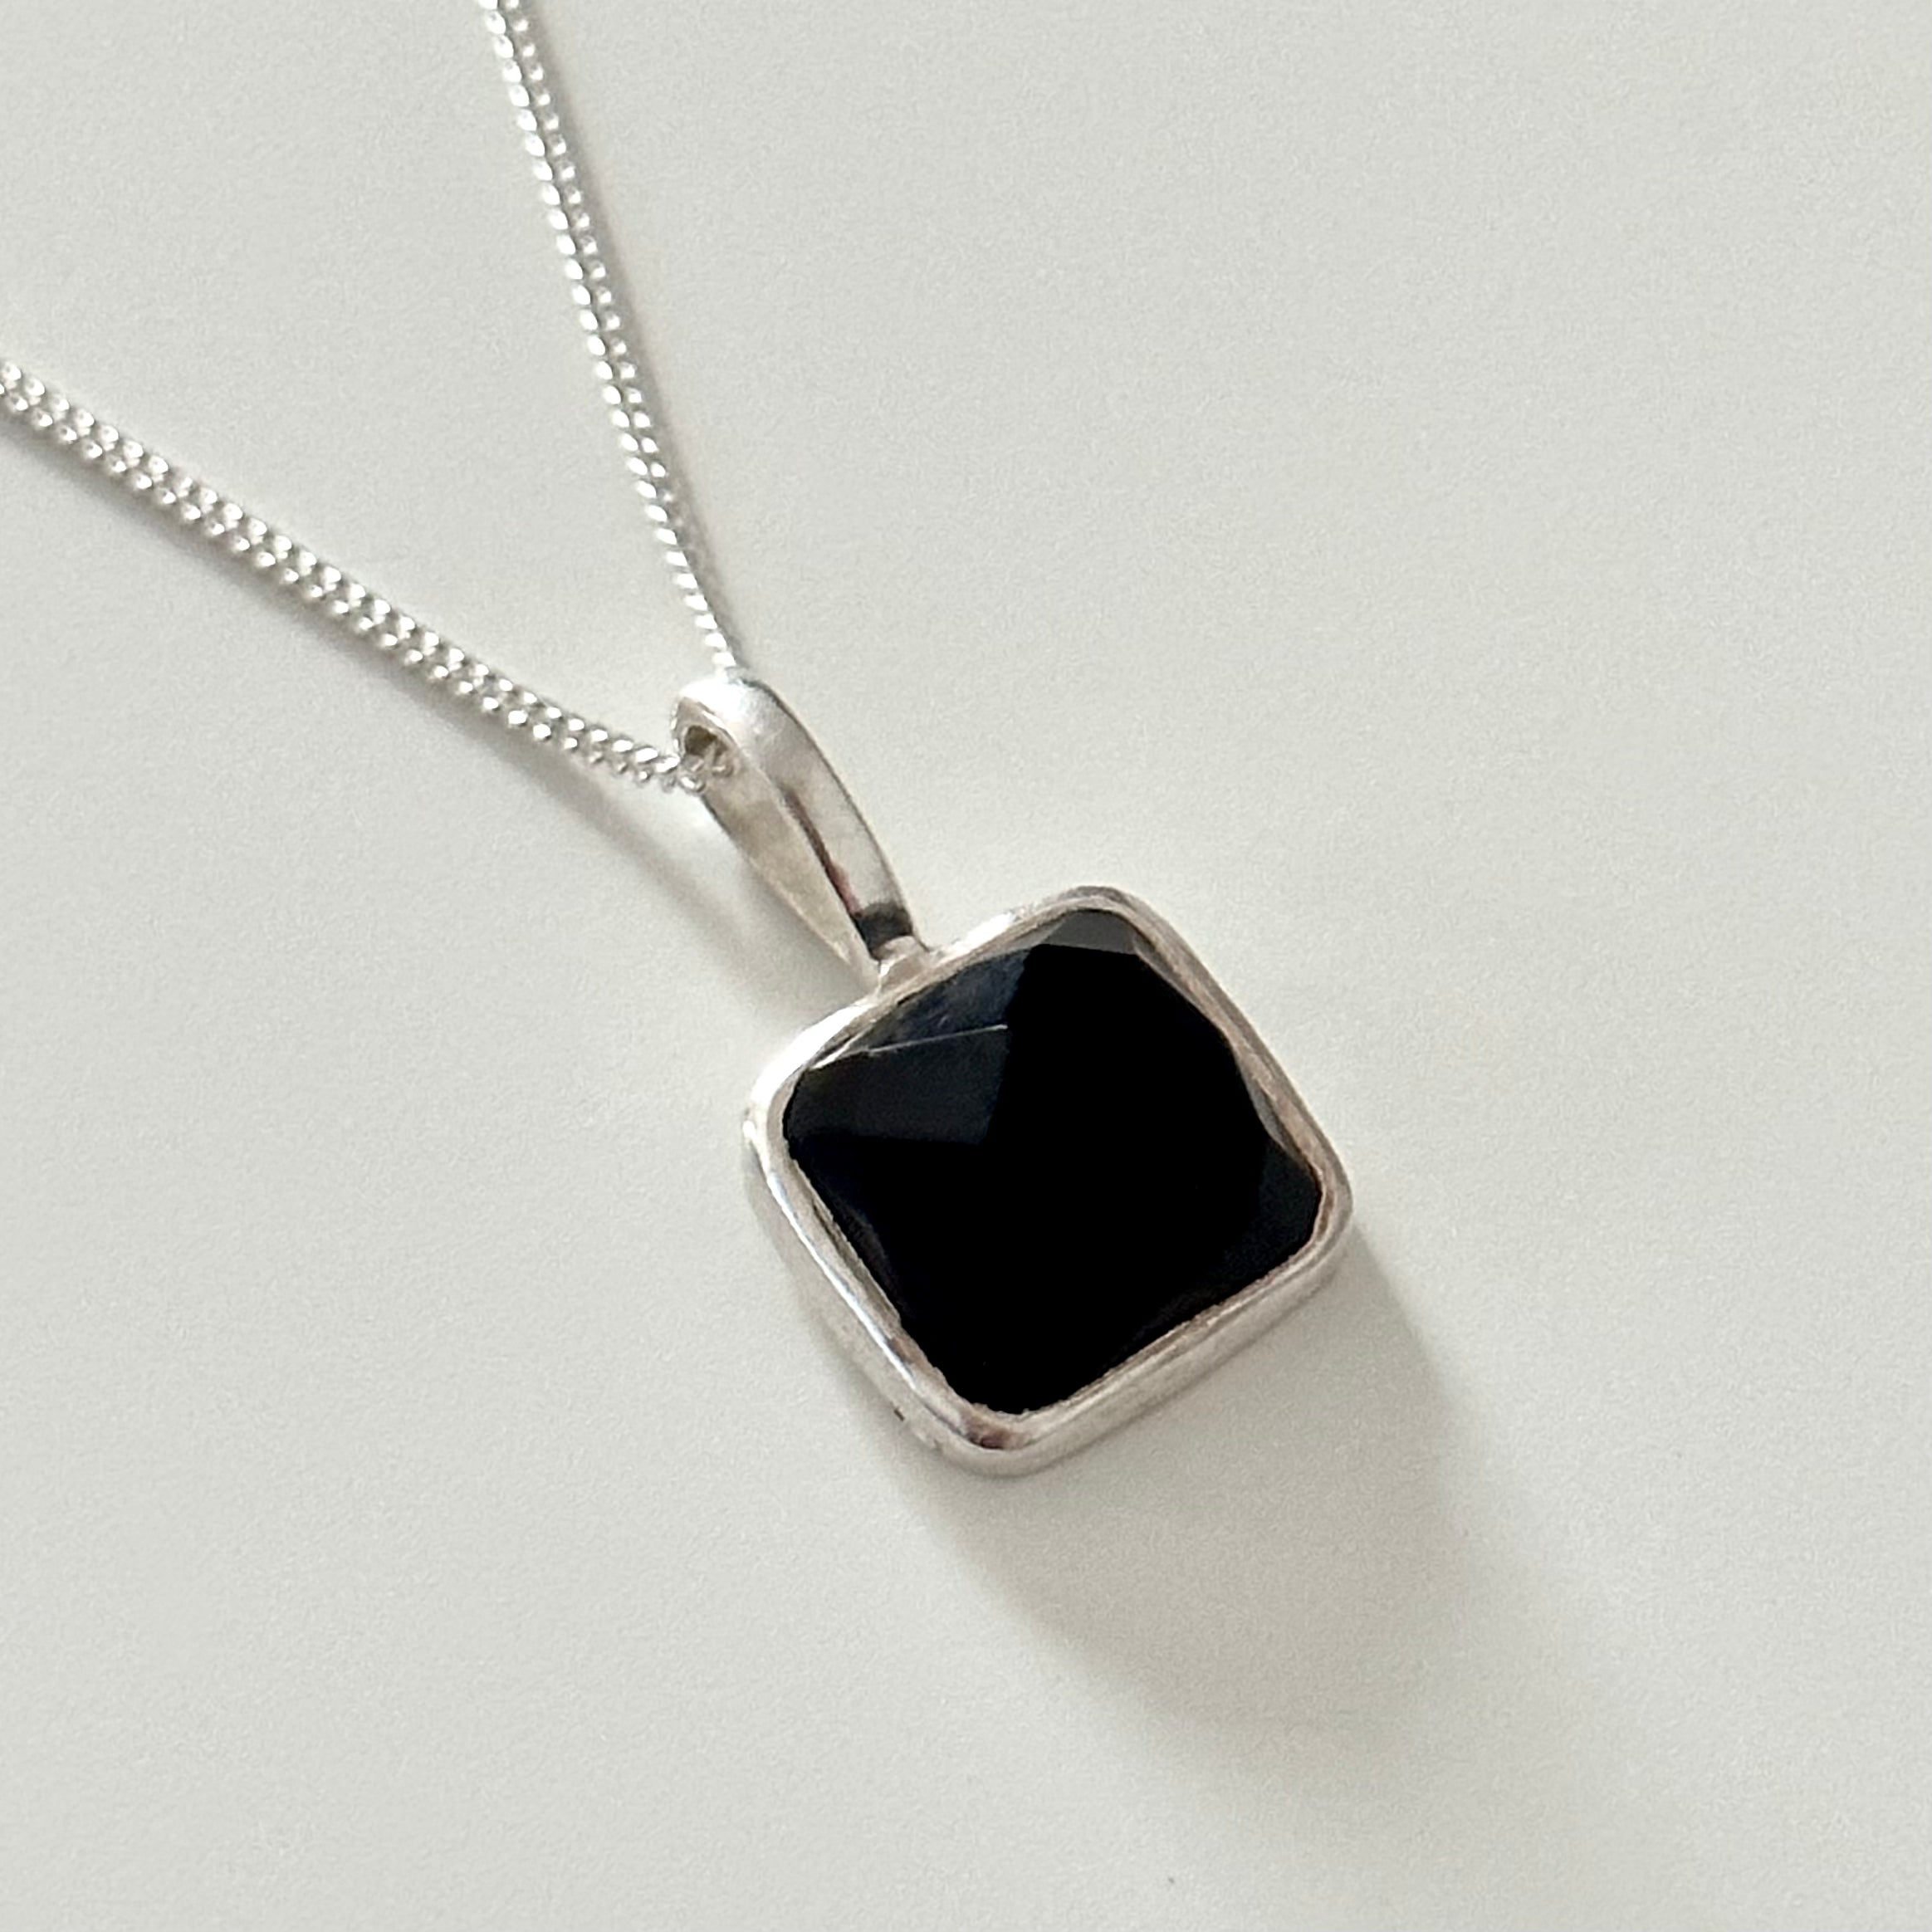 Sterling Silver Pendant Necklace with a Faceted Square Gemstone - Black Onyx